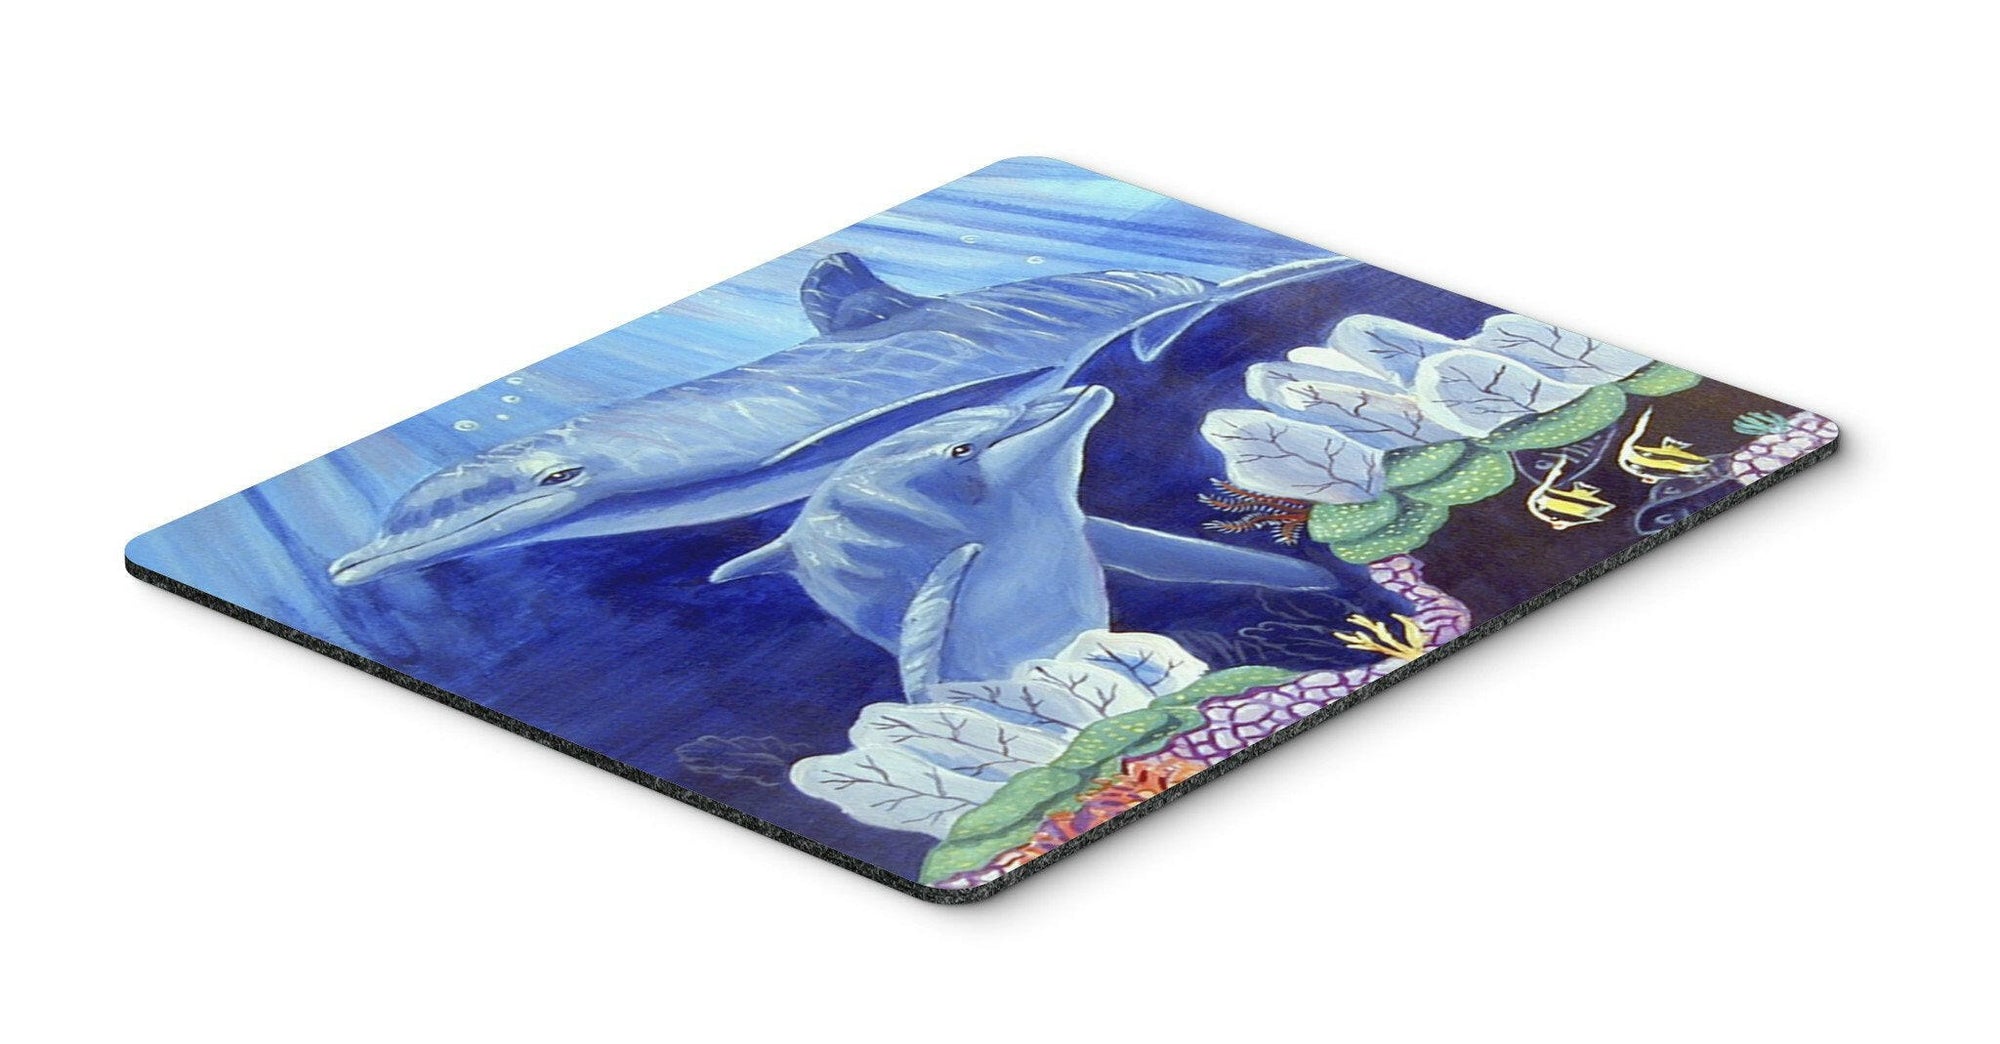 Dolphin under the sea Mouse pad, hot pad, or trivet by Caroline's Treasures